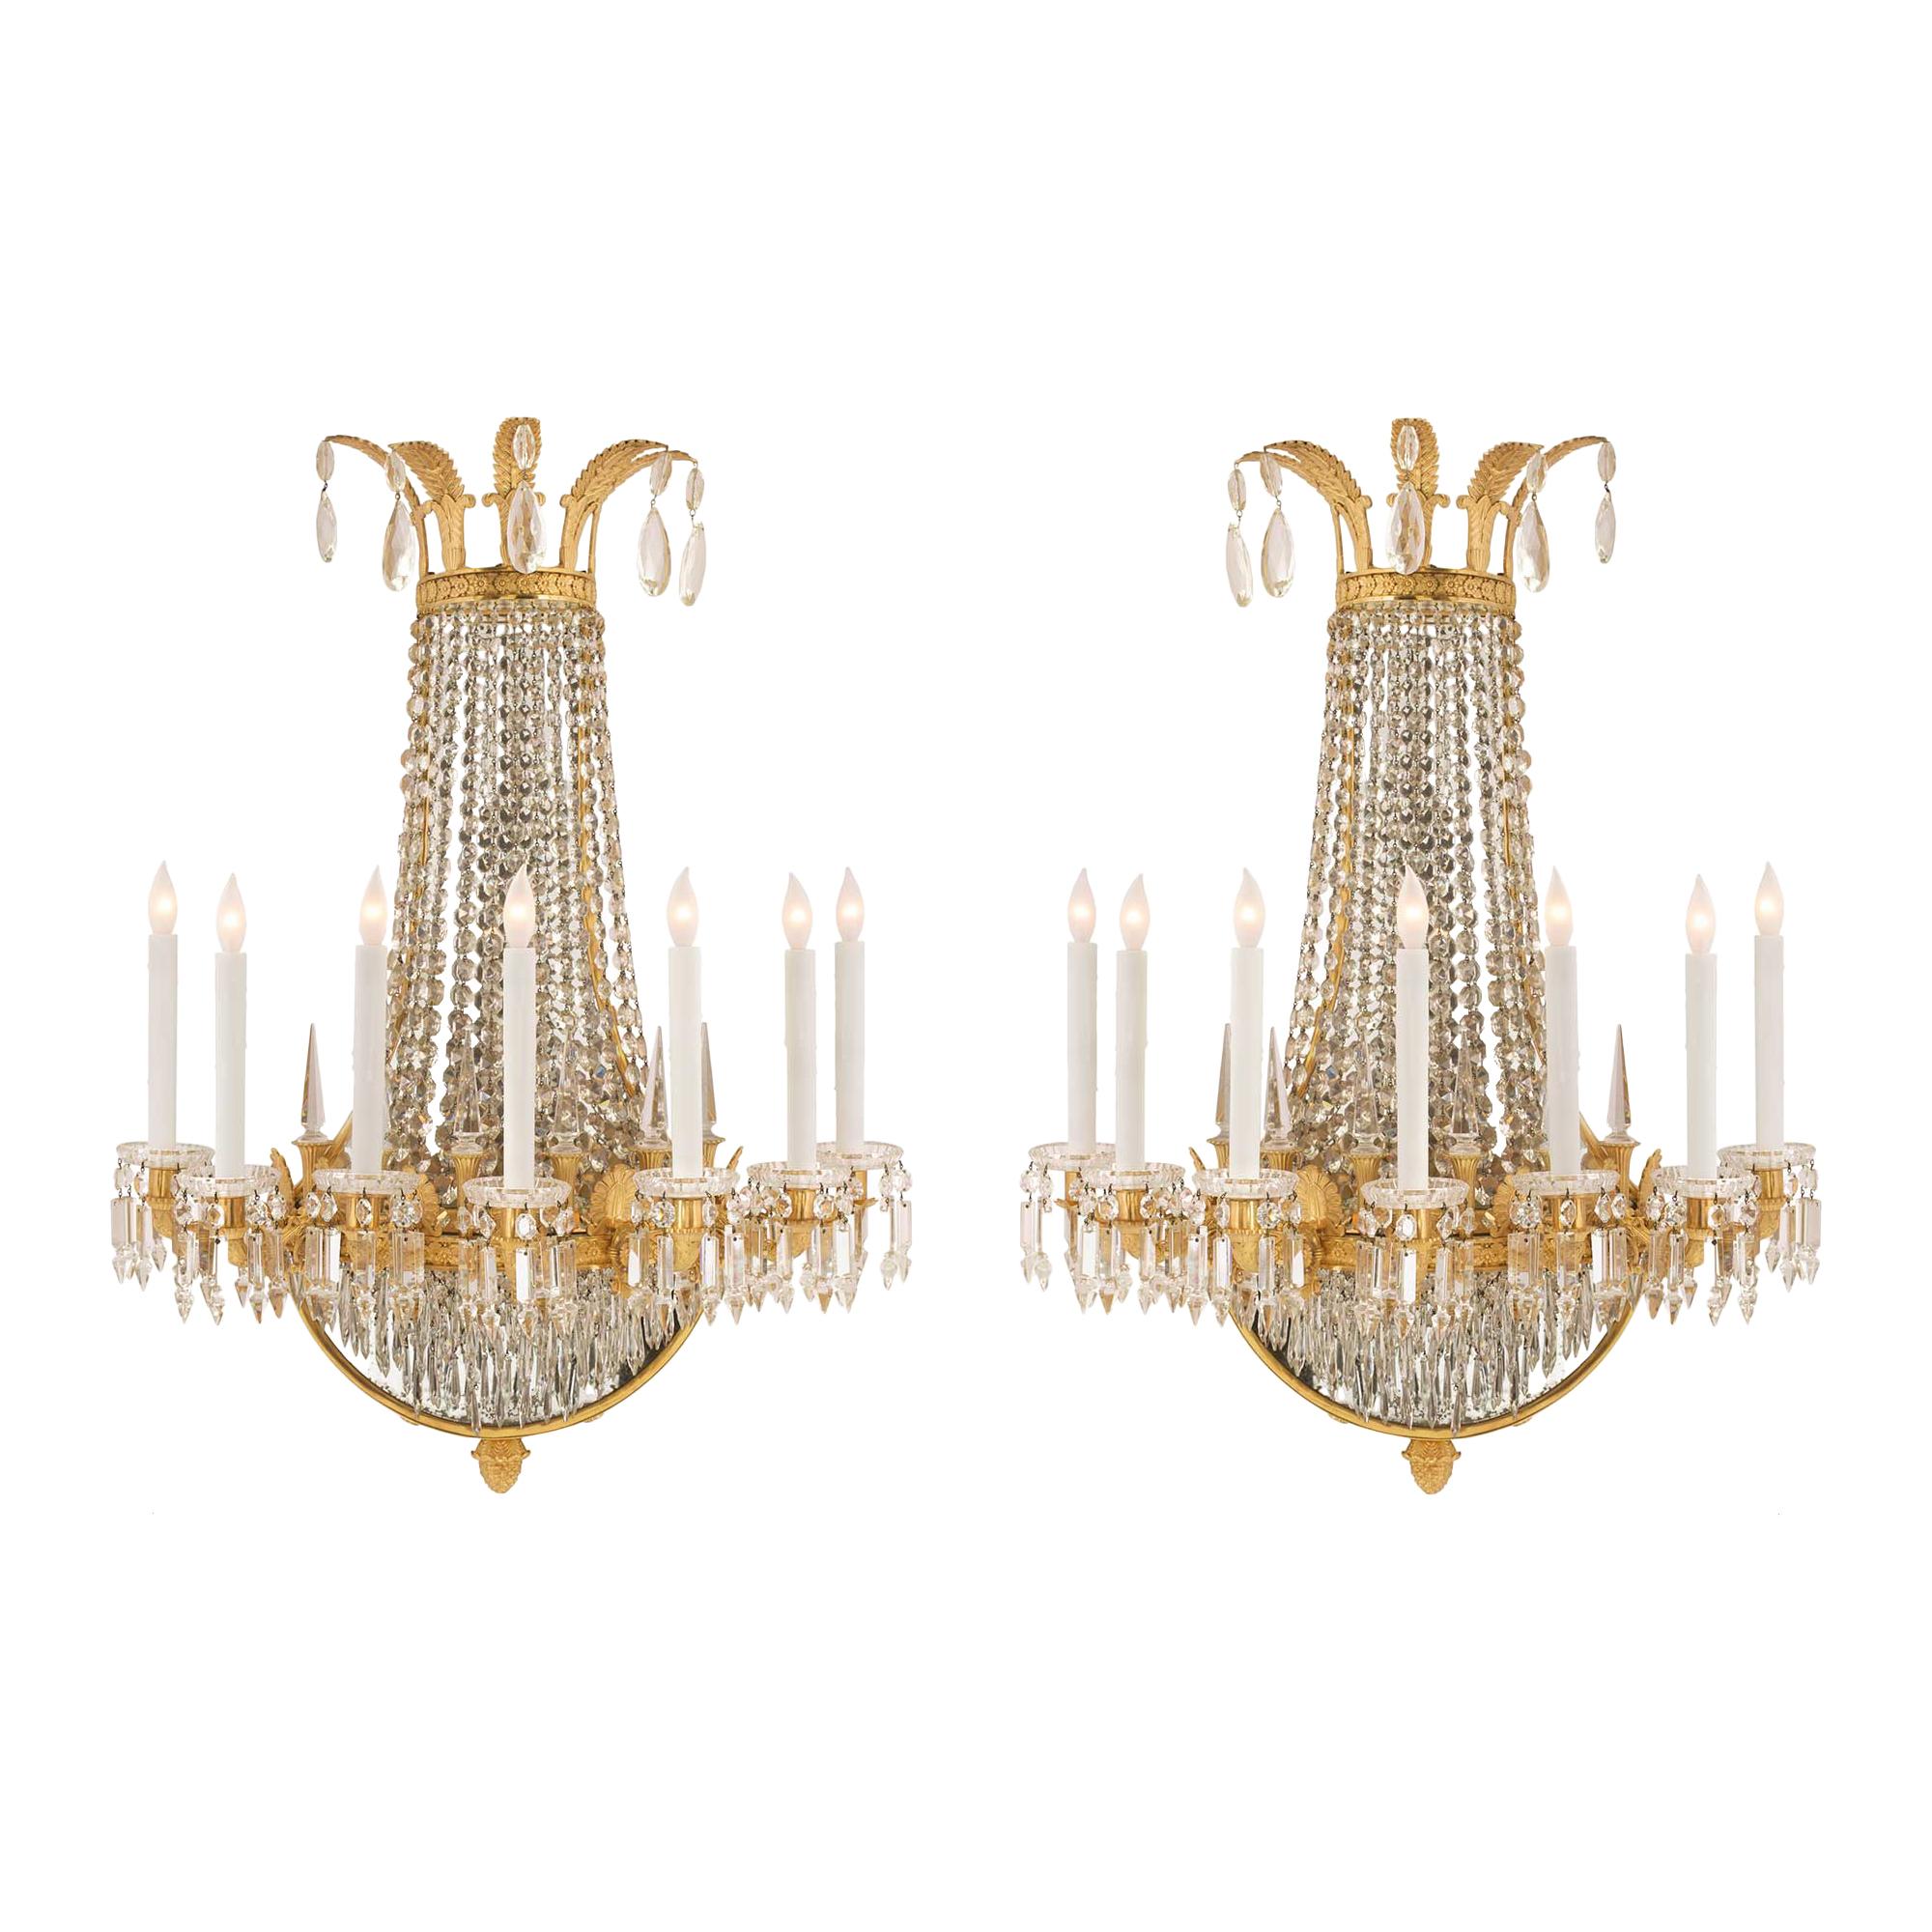 French 19th Century Neoclassical St. Ormolu and Crystal Sconces Signed Baccarat